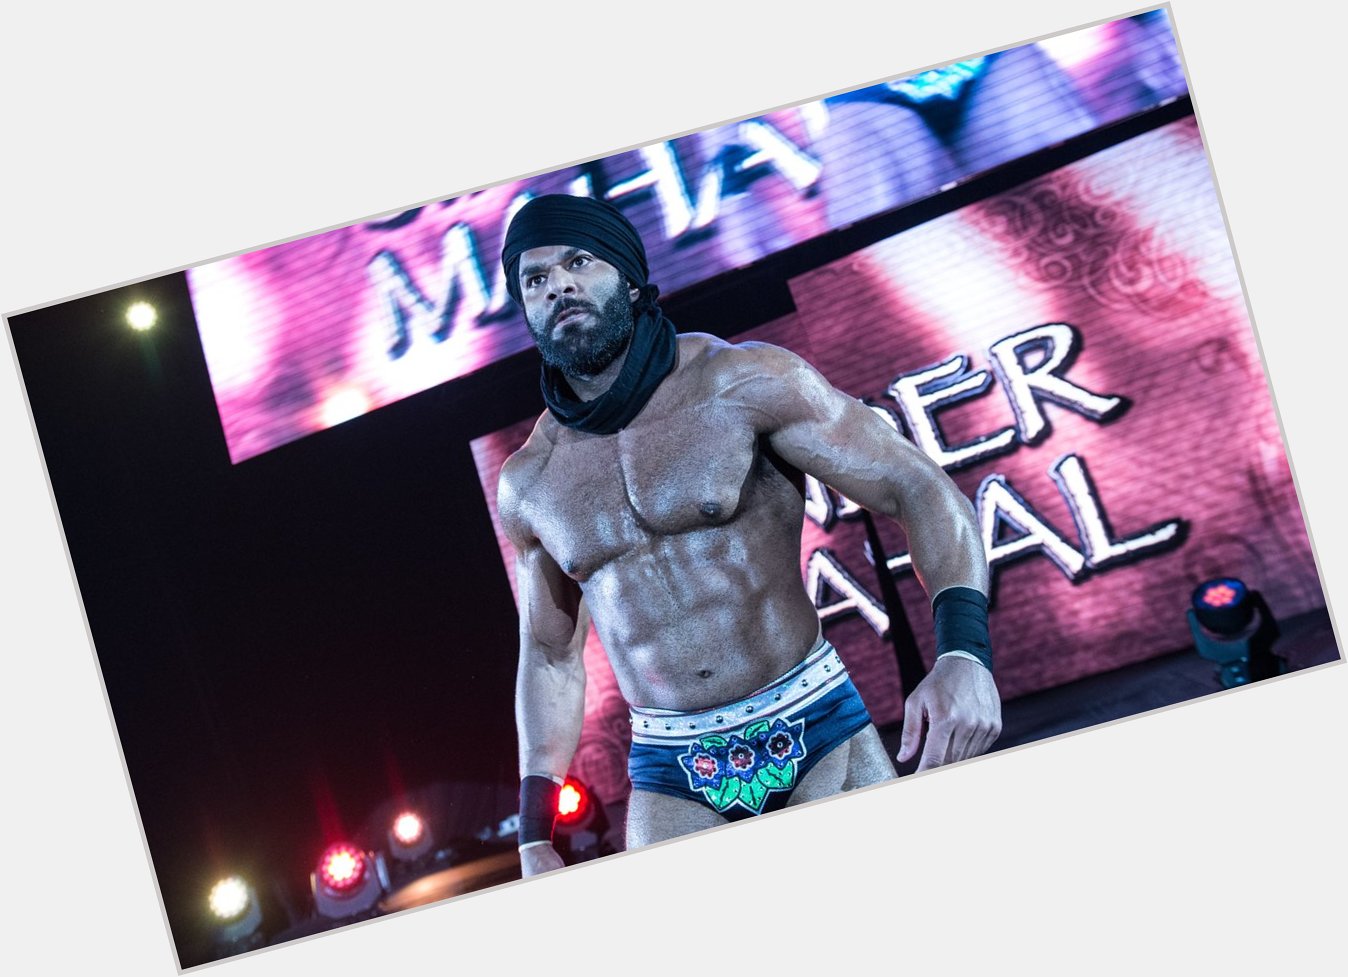 Happy Birthday to former WWE Champion Jinder Mahal who turns 35 today! 